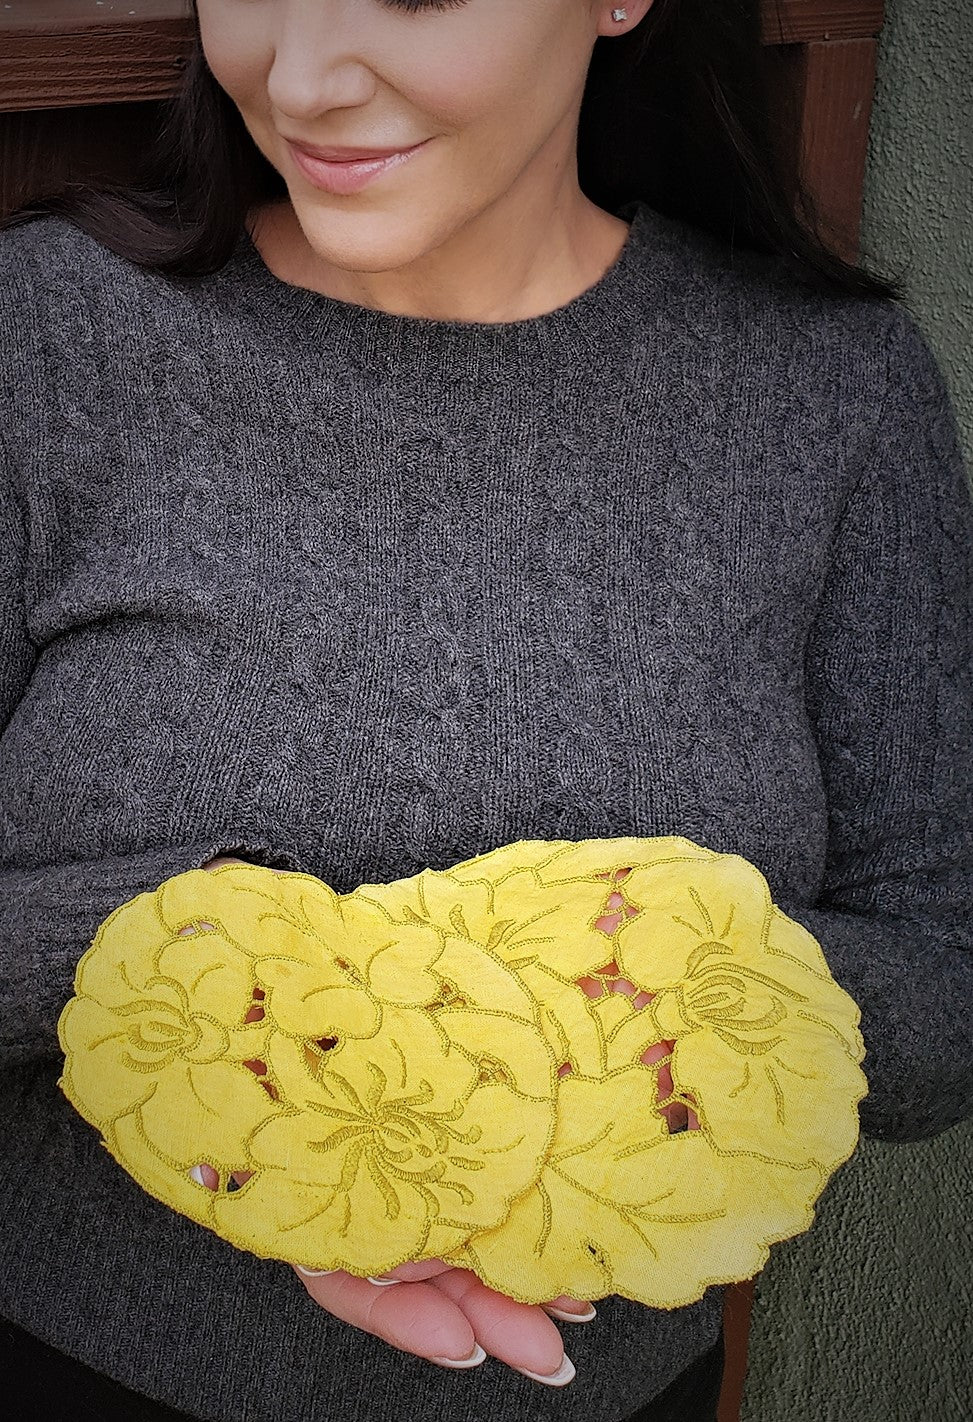 Set of Two Hand Plant Dyed Vintage Doilies in Sunny Yellow